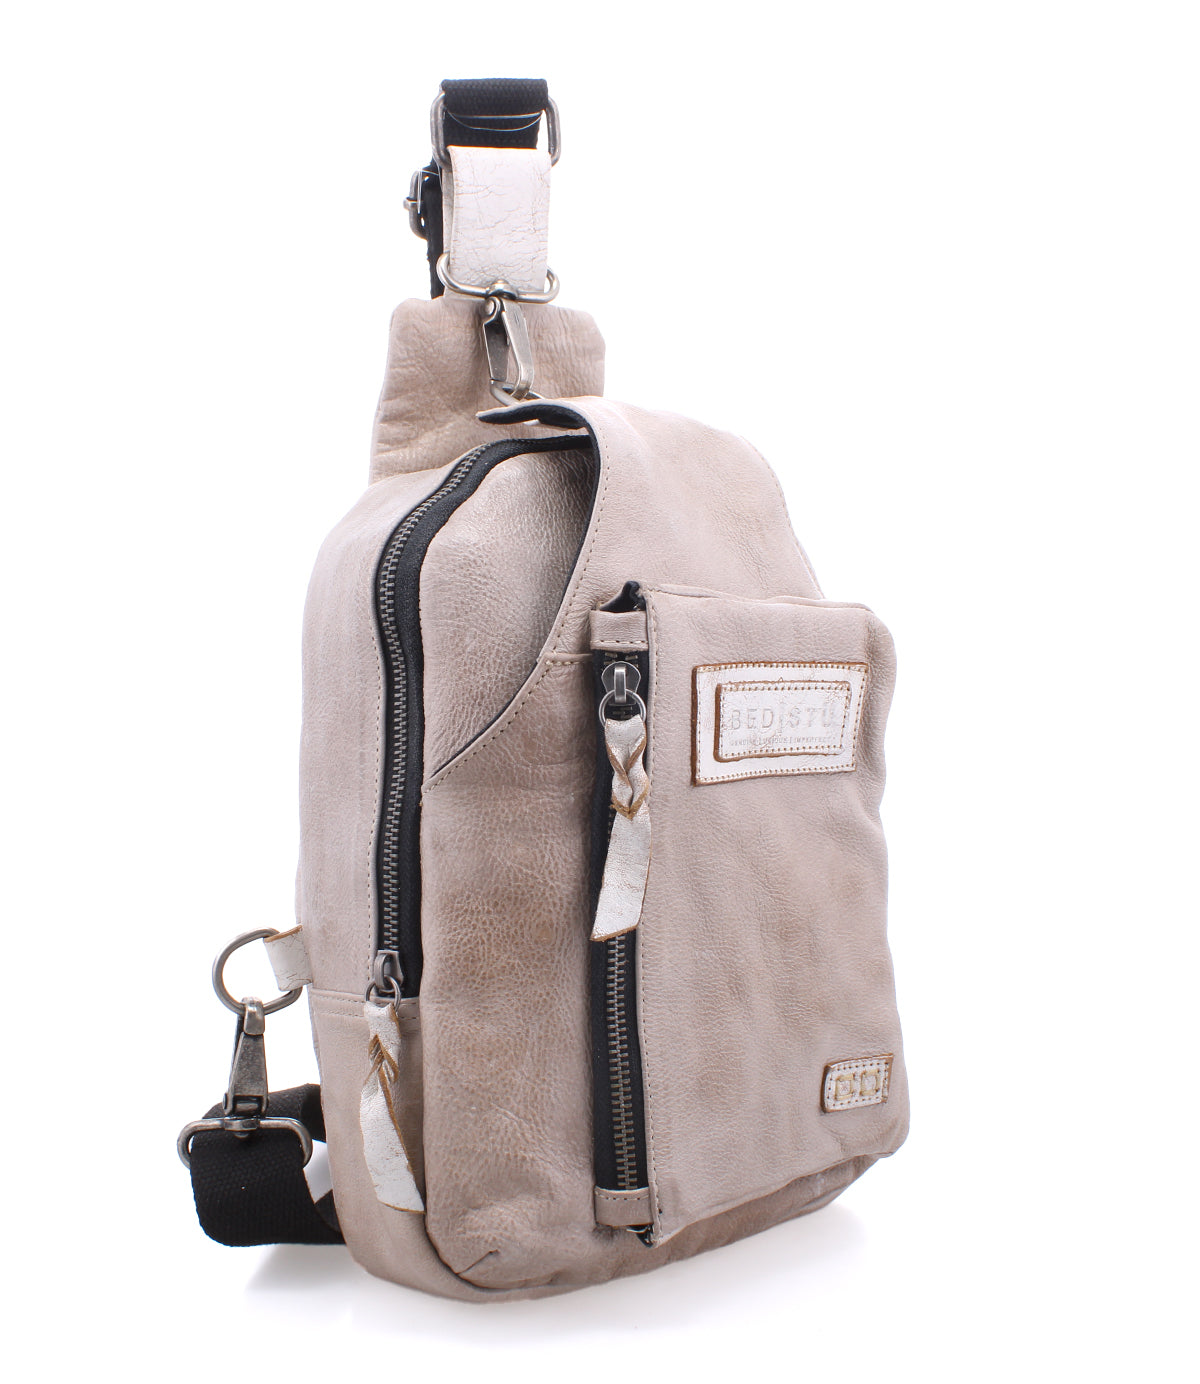 This durable Beau backpack by Bed Stu features a convenient zipper on the side, perfect for hands-free activities.